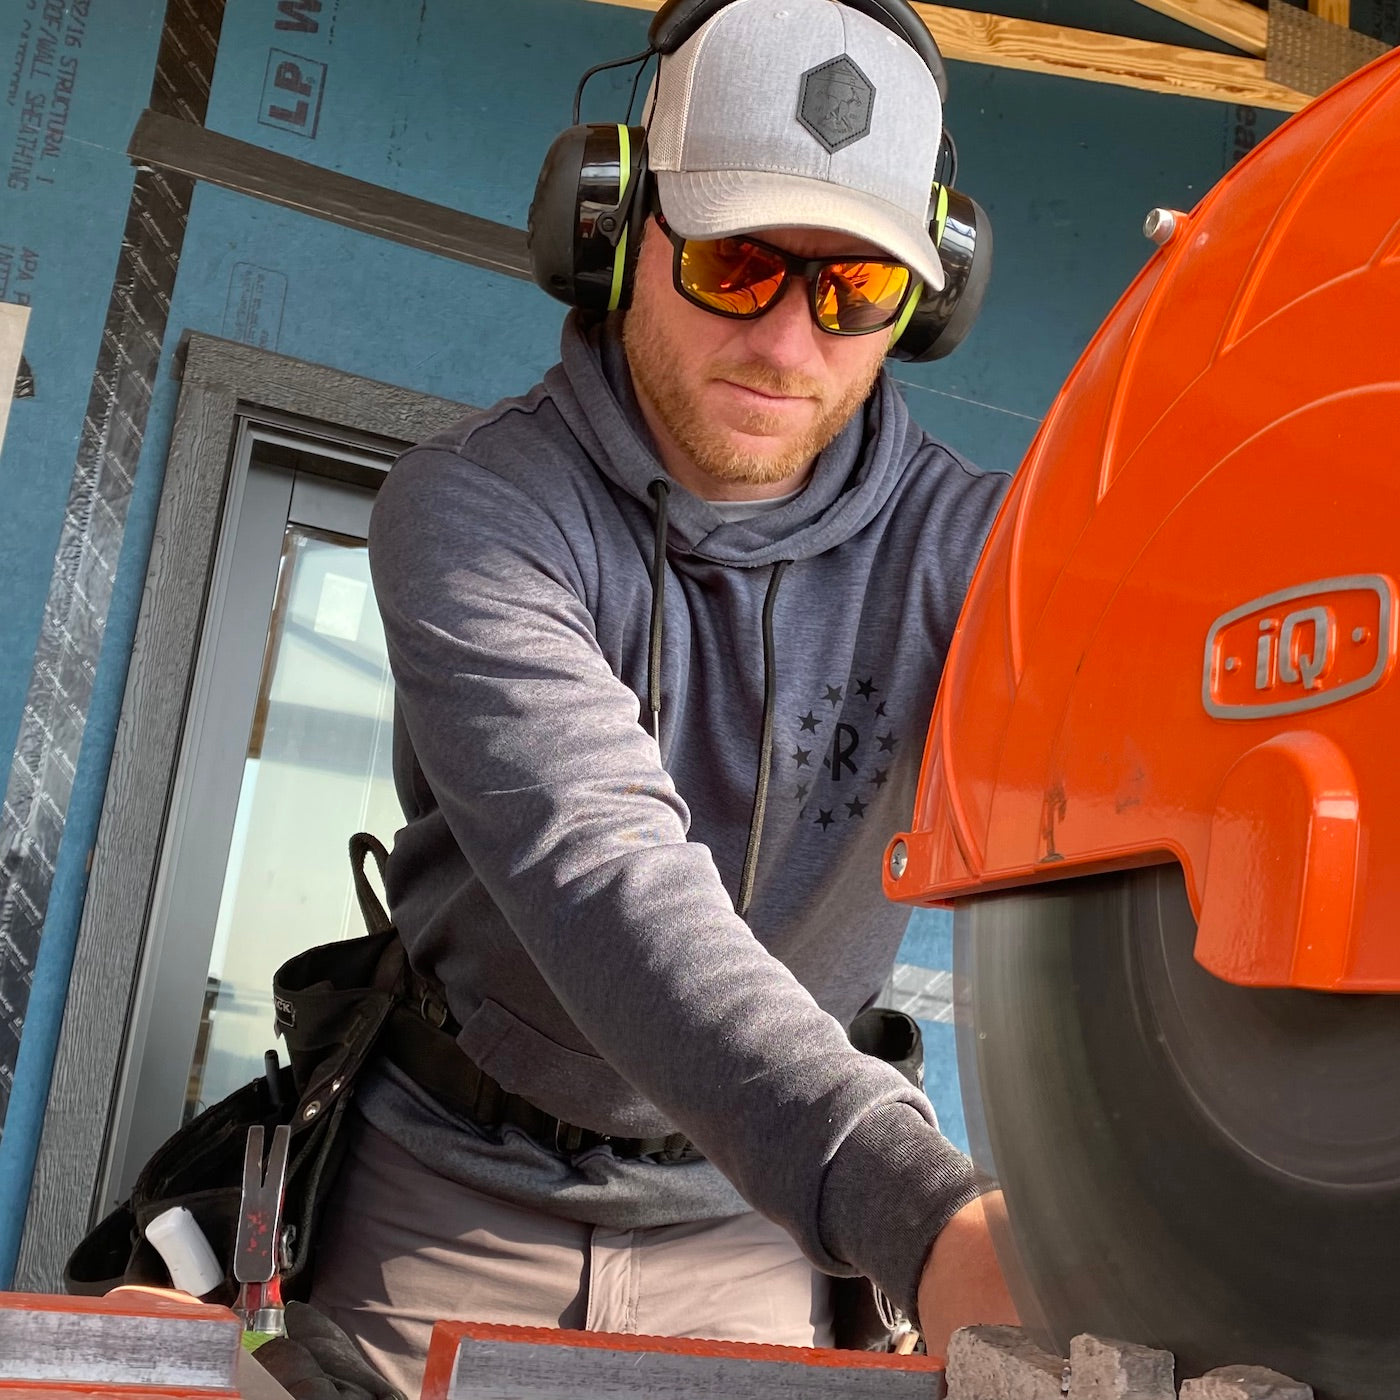 ISOtunes Hearing Protection Used by Construction Pros